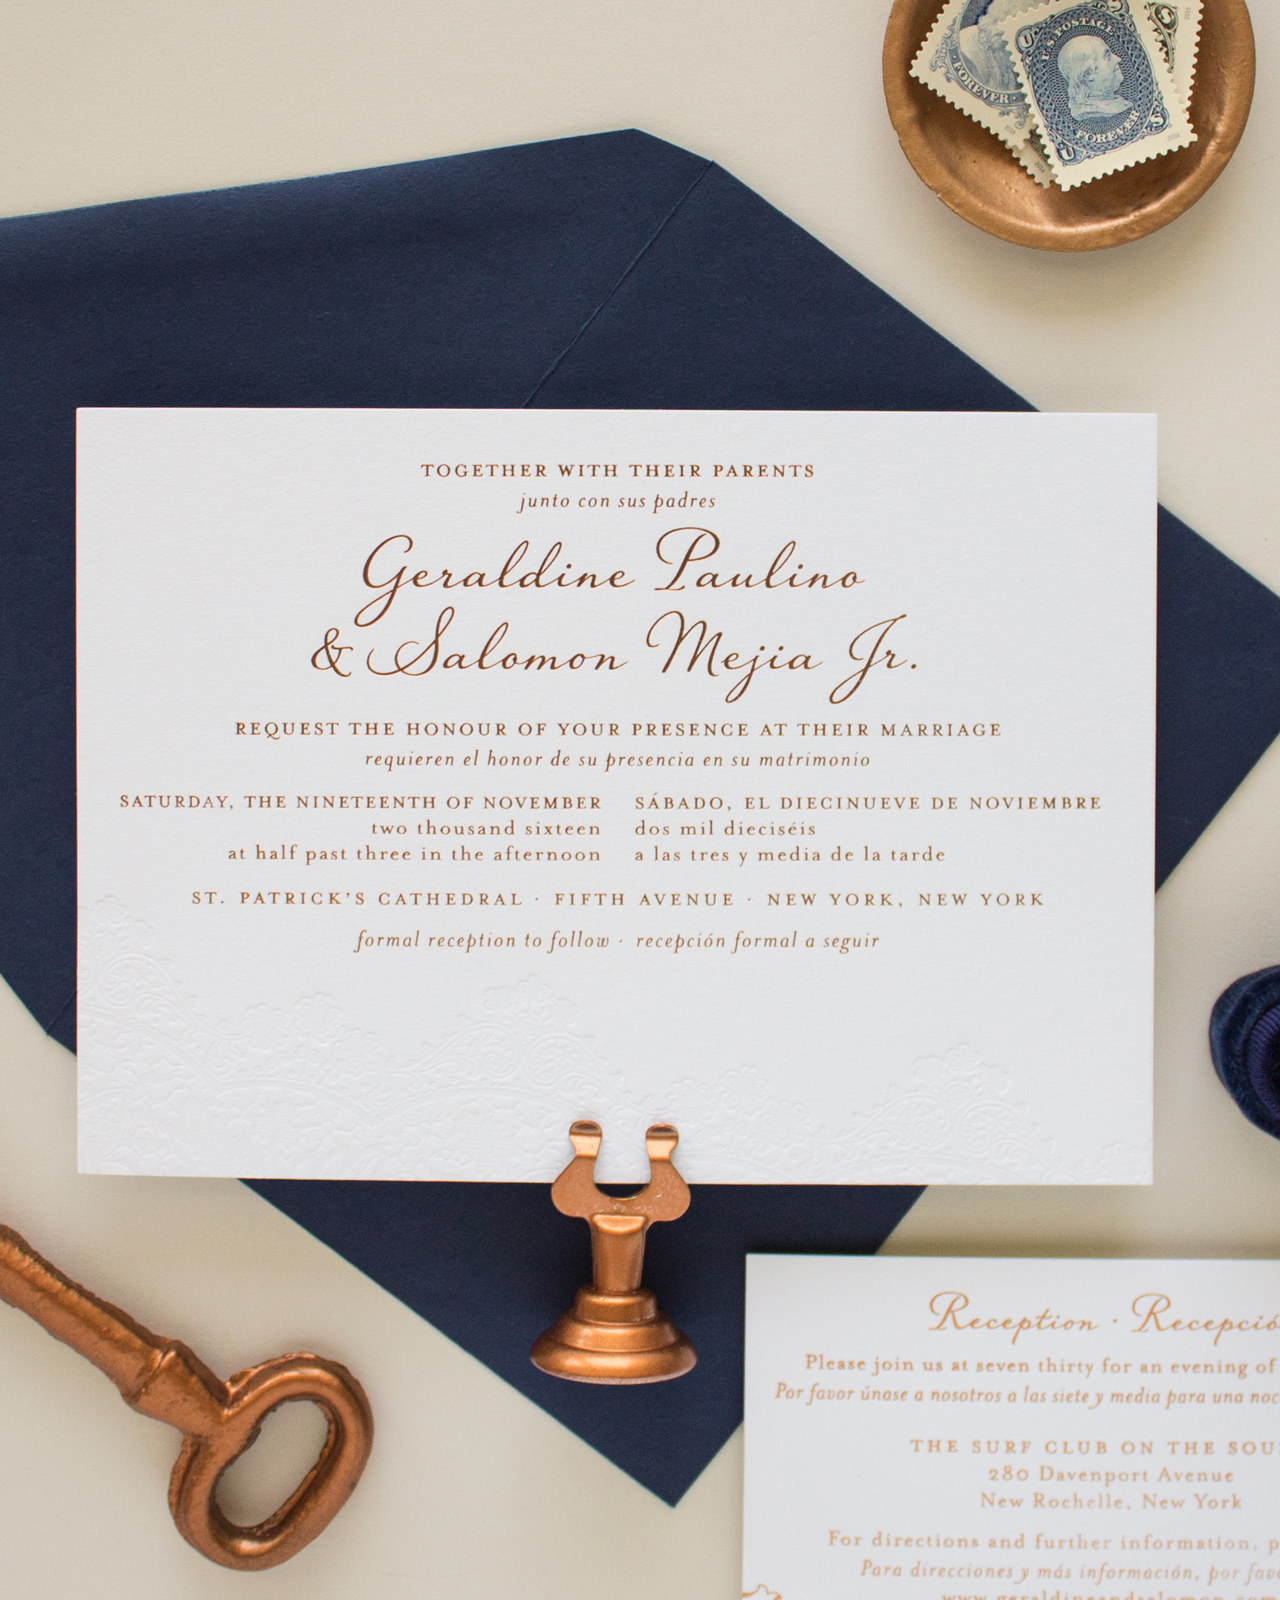 Bilingual Copper Foil and Blind Letterpress Wedding Invitations by Banter and Charm